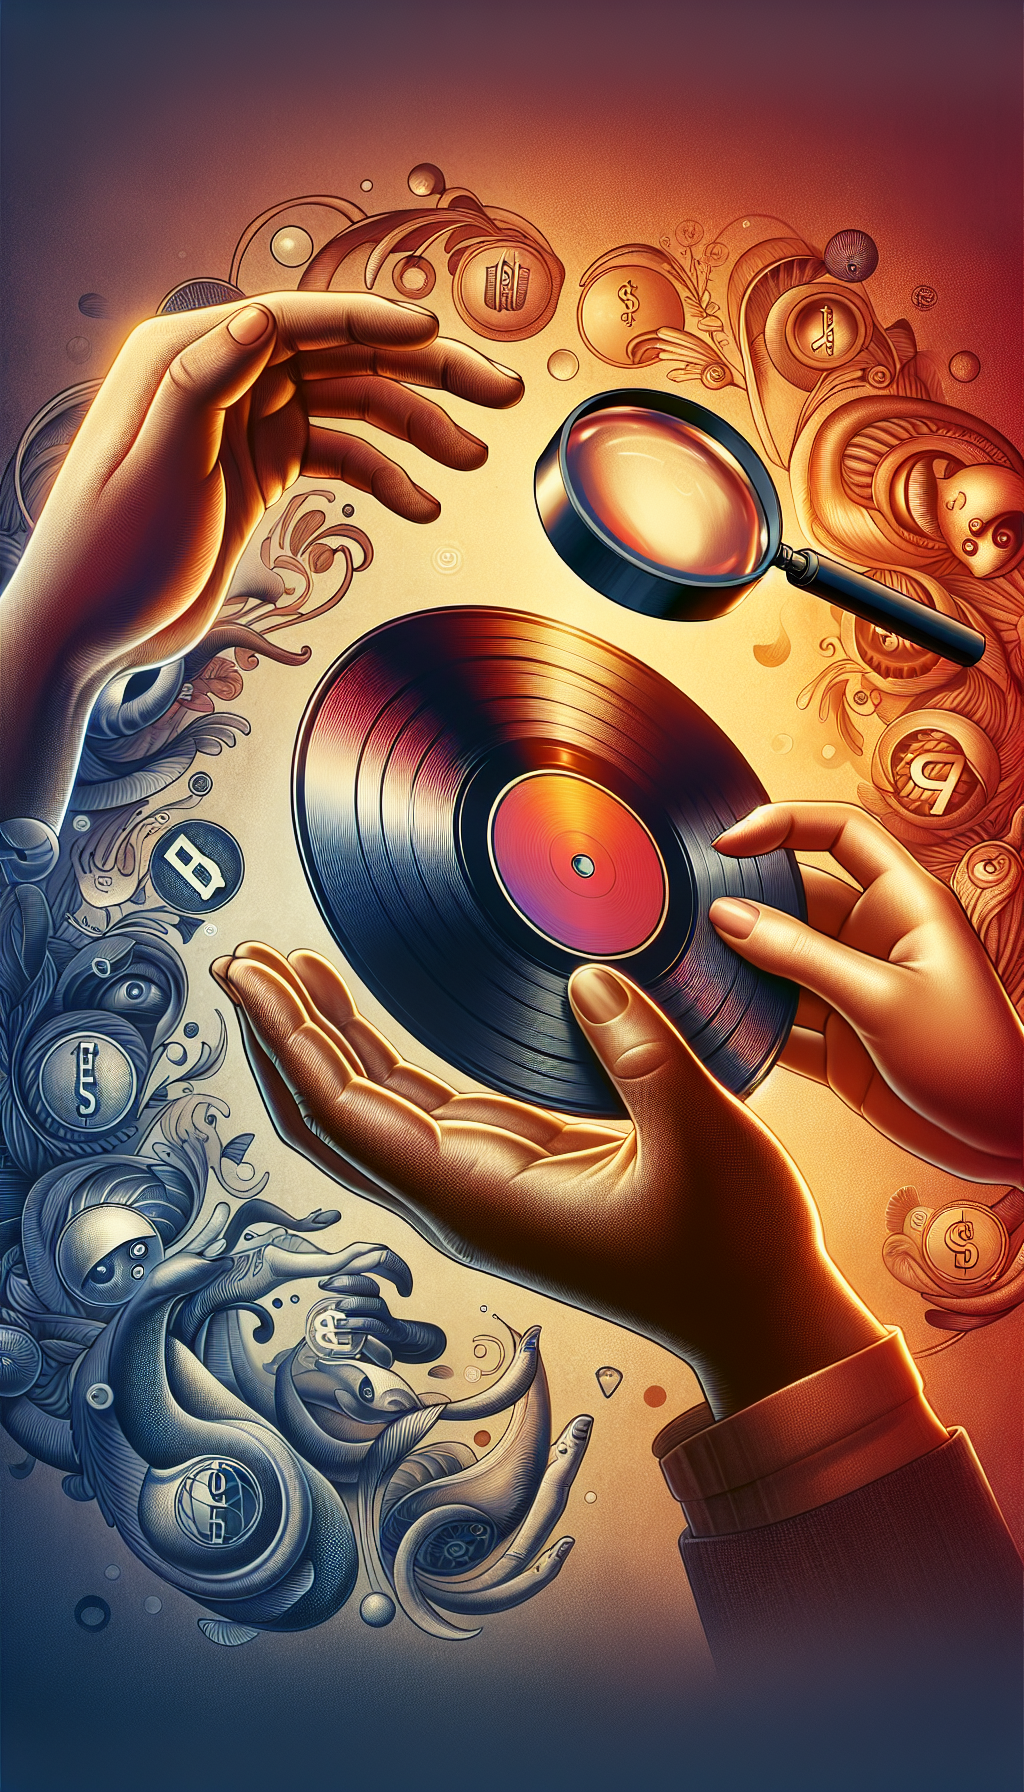 An illustration depicts a pair of hands gently cradling a vibrant, classic vinyl record, with a magnifying glass hovering above, inspecting for imperfections. It’s enveloped by a semi-transparent shield symbolizing protection, while in the background, stylized dollar signs merge into artistic flourishes, reflecting the intertwined concepts of preservation and appraisal.